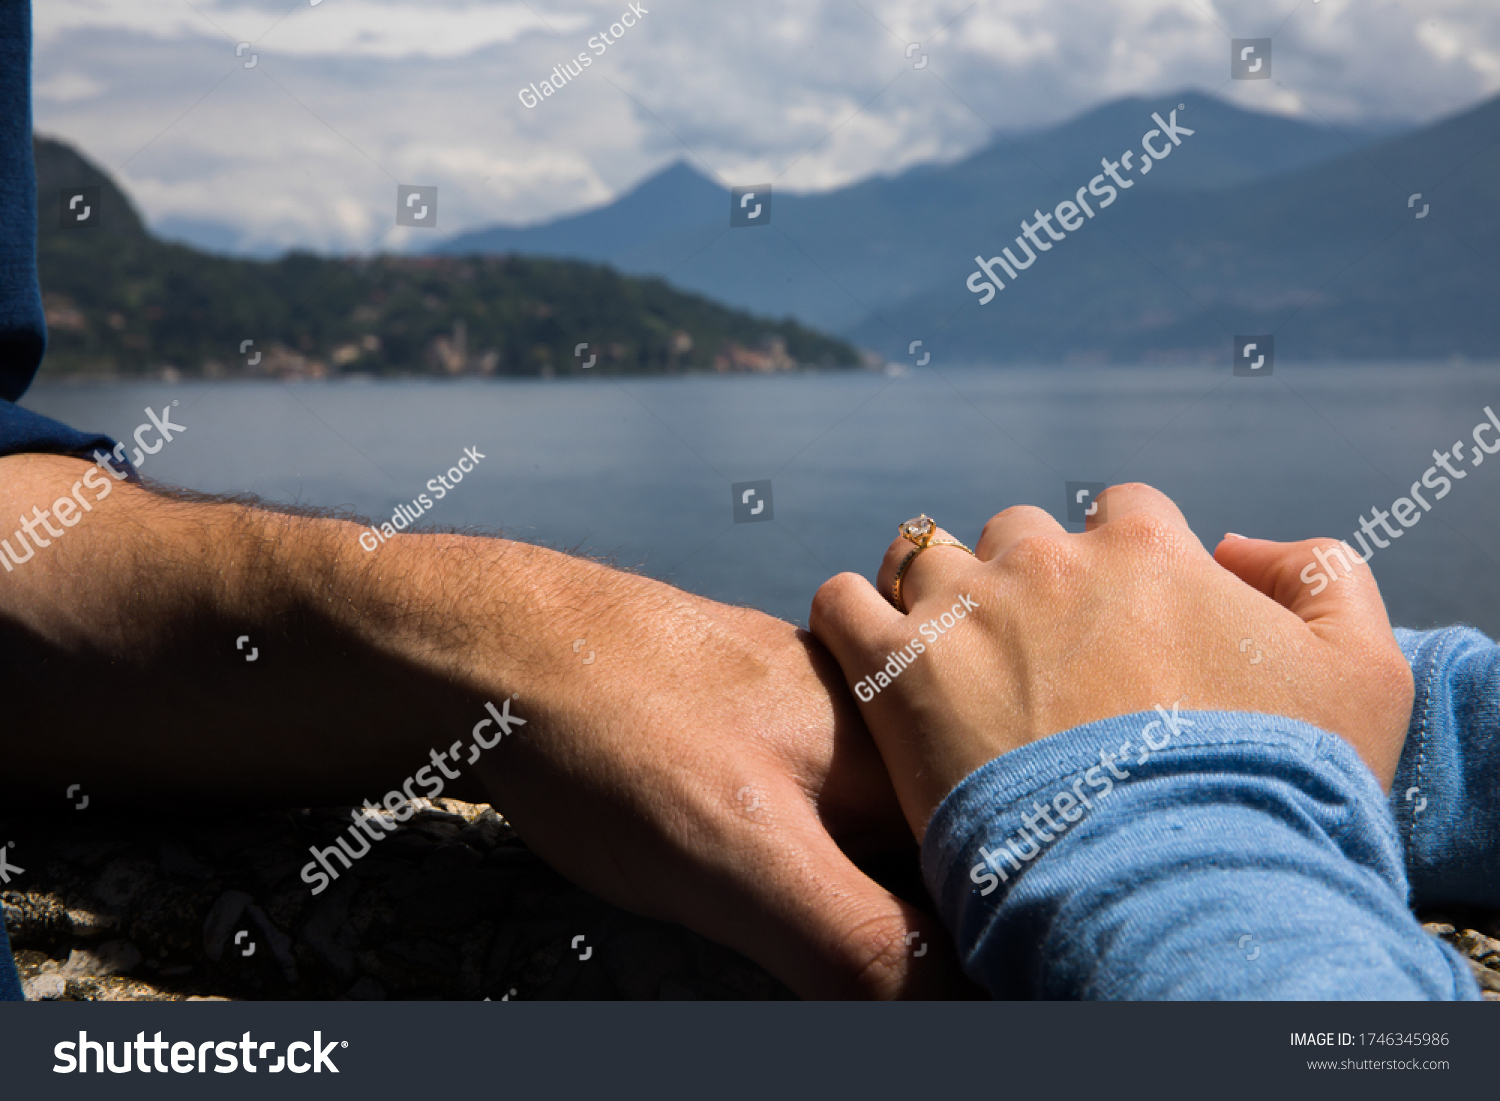 Couple. You can see the hands touching each other. Sensually.Water and mountains in the background.